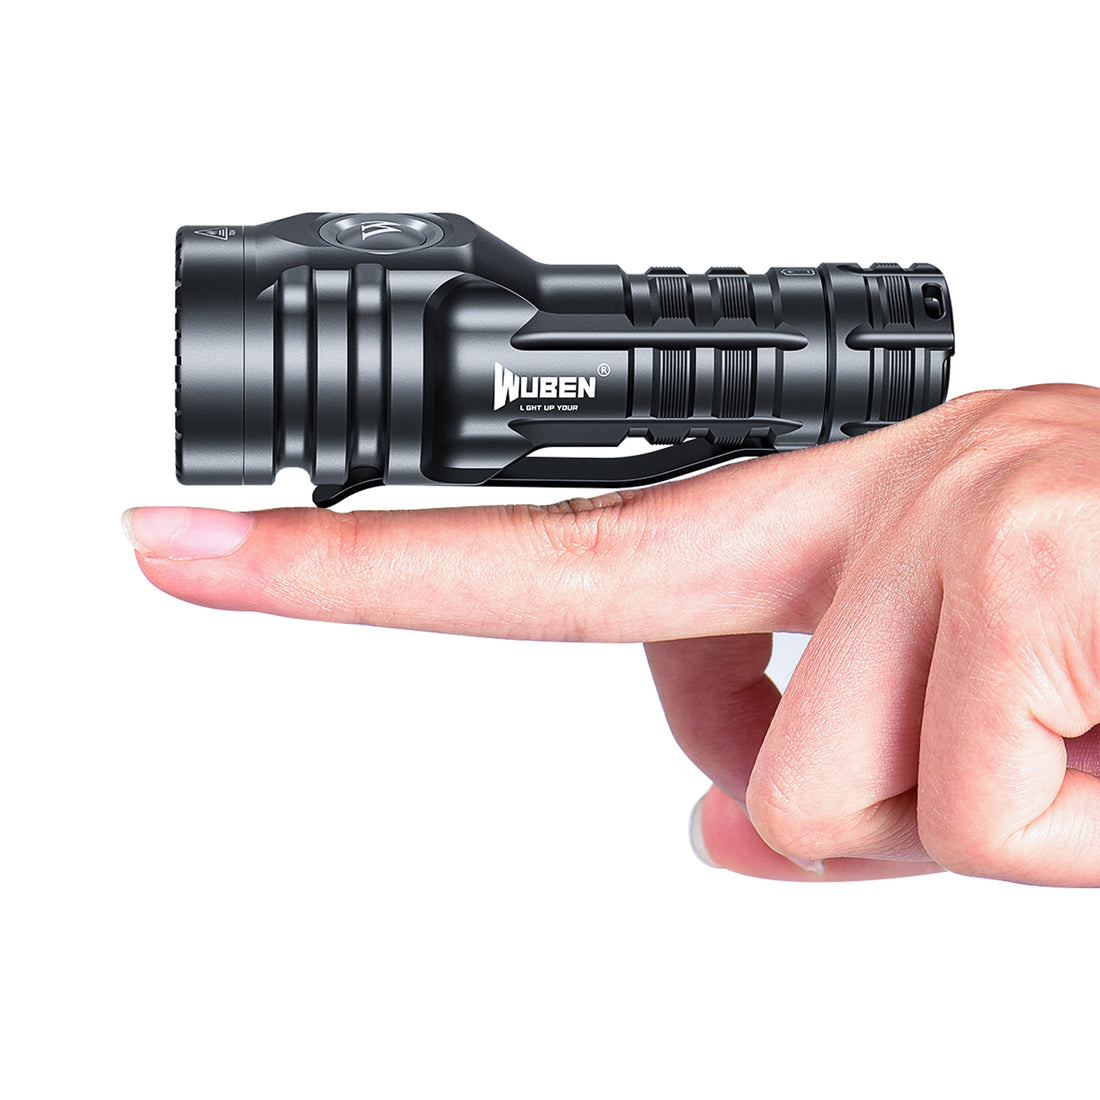 Be Prepared for Anything: Why Wuben Flashlights are Essential for Your EDC, Hunting, Hiking, Camping, and Bug Out Bag?